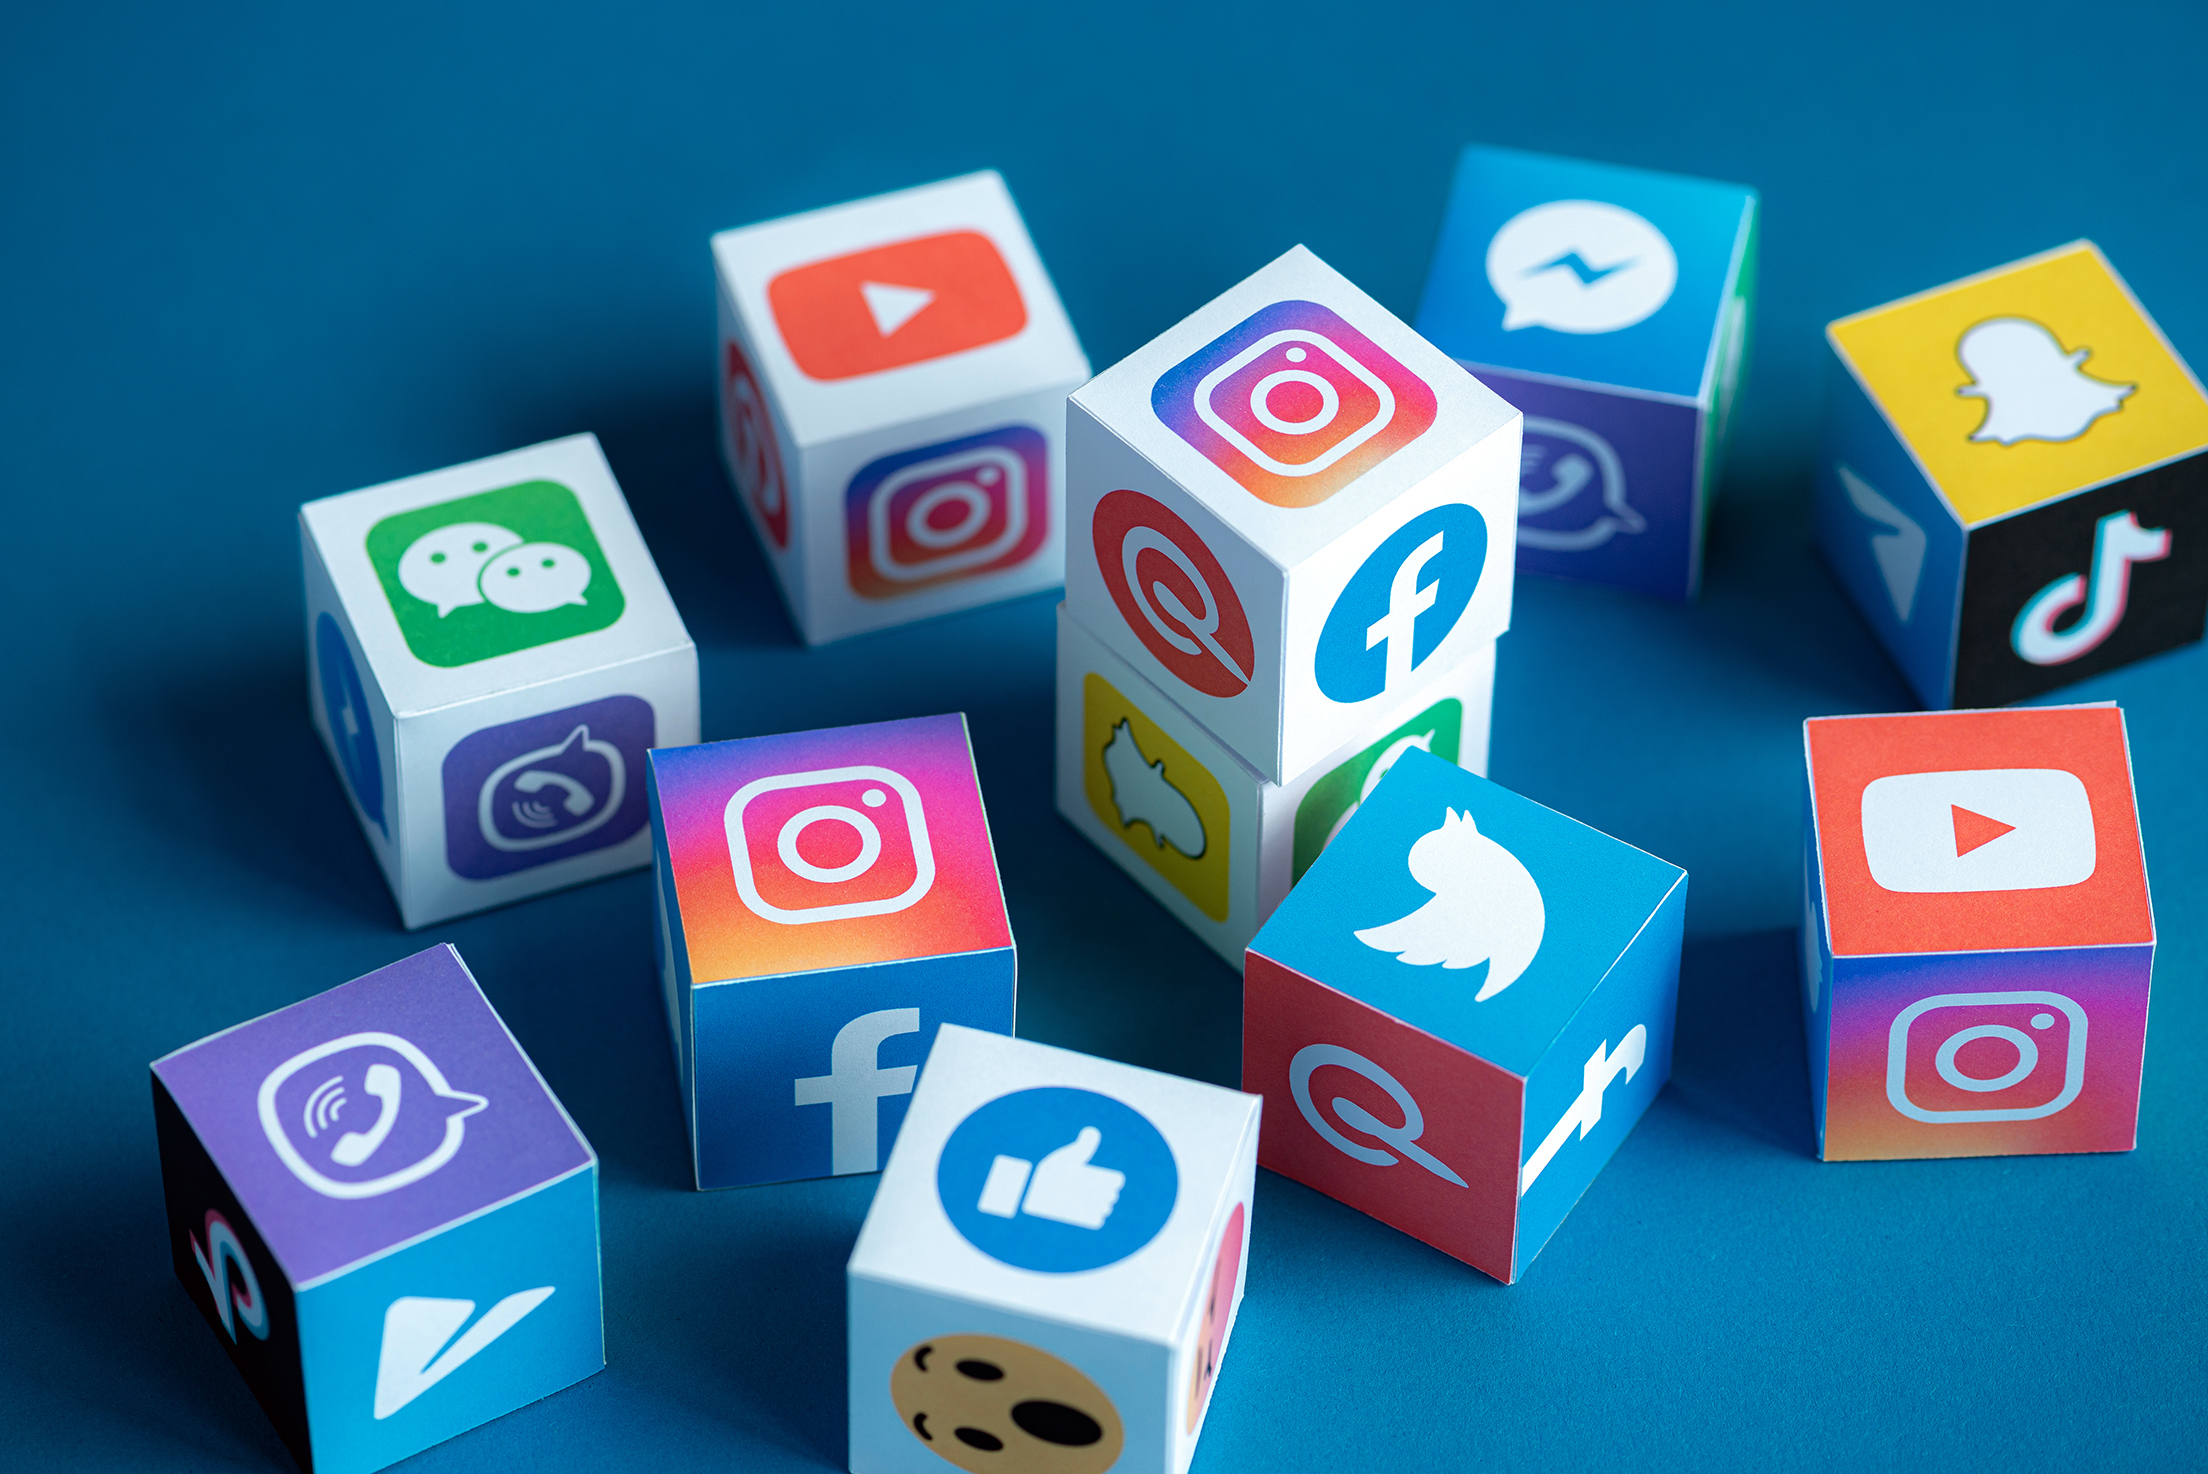 A paper cubes collection with printed logos of world-famous social networks and online messengers, such as Facebook, Instagram, YouTube, Telegram and others.